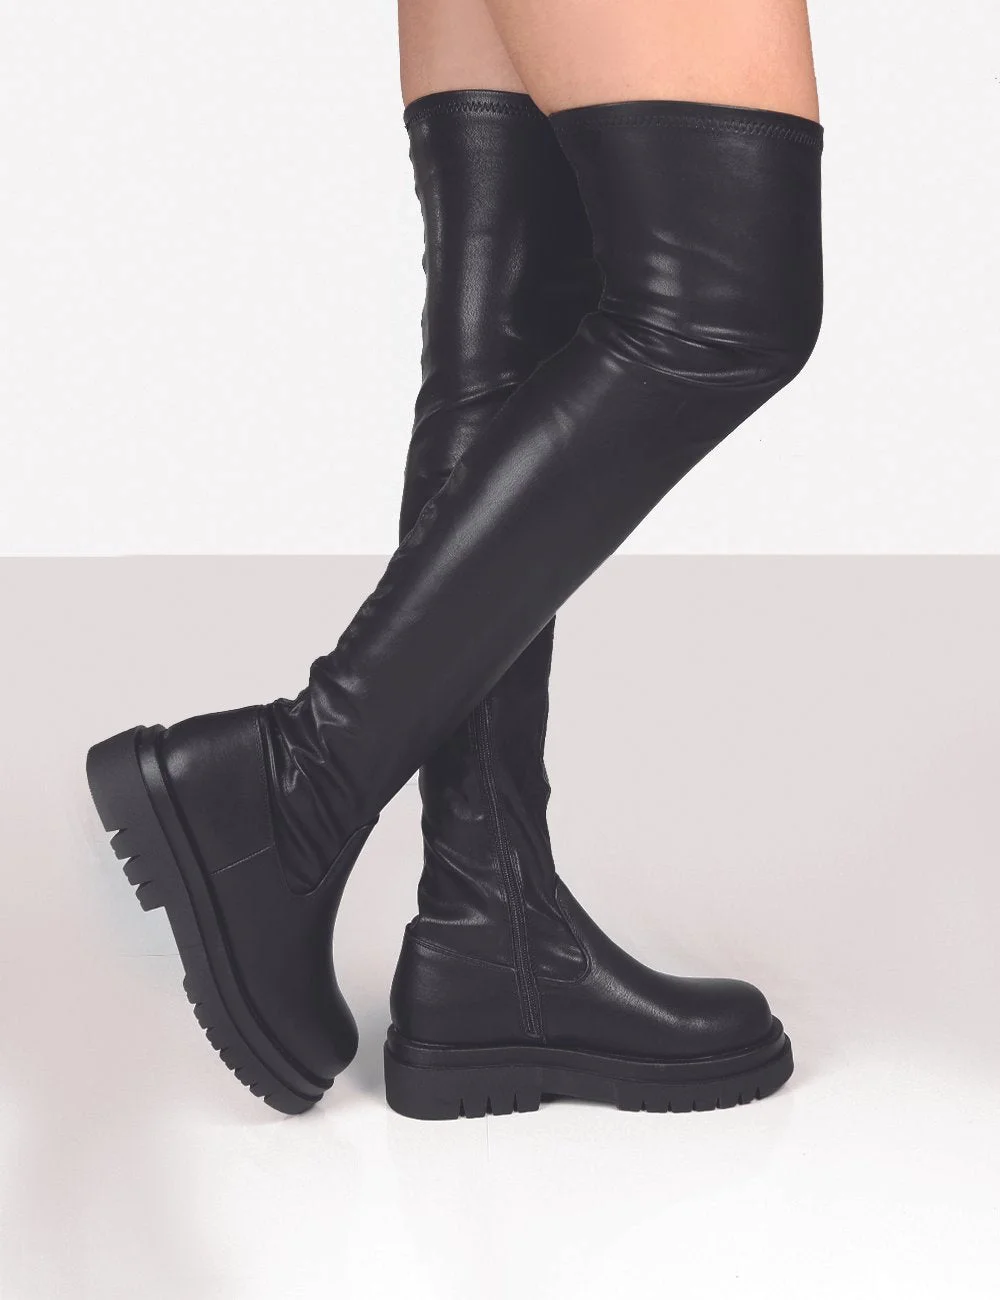 Brand ZA Platform Chunky Heel Zipper Ladies Thigh High Boots Fashion Comfy Black Design Casual Over The Knee Boots For Women